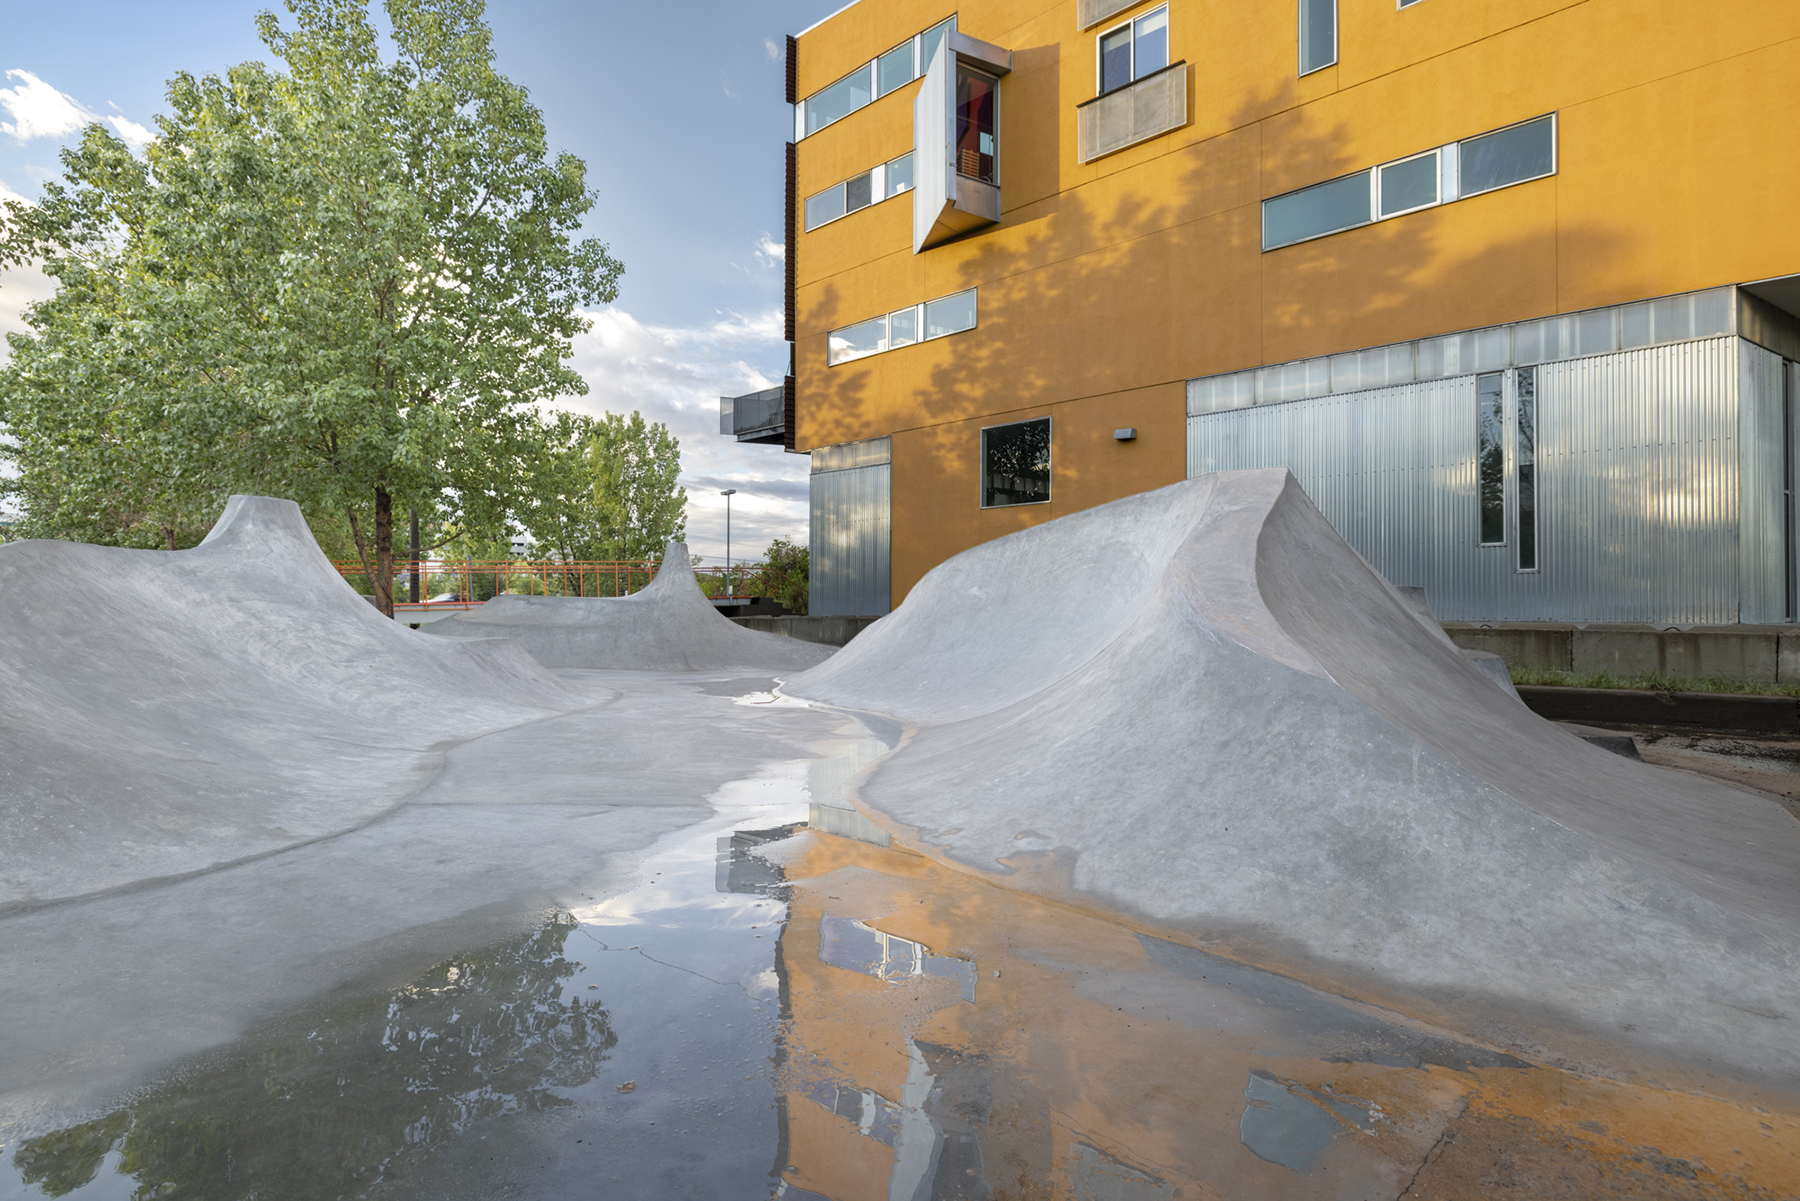 skateboard park with standing water showing drainage path